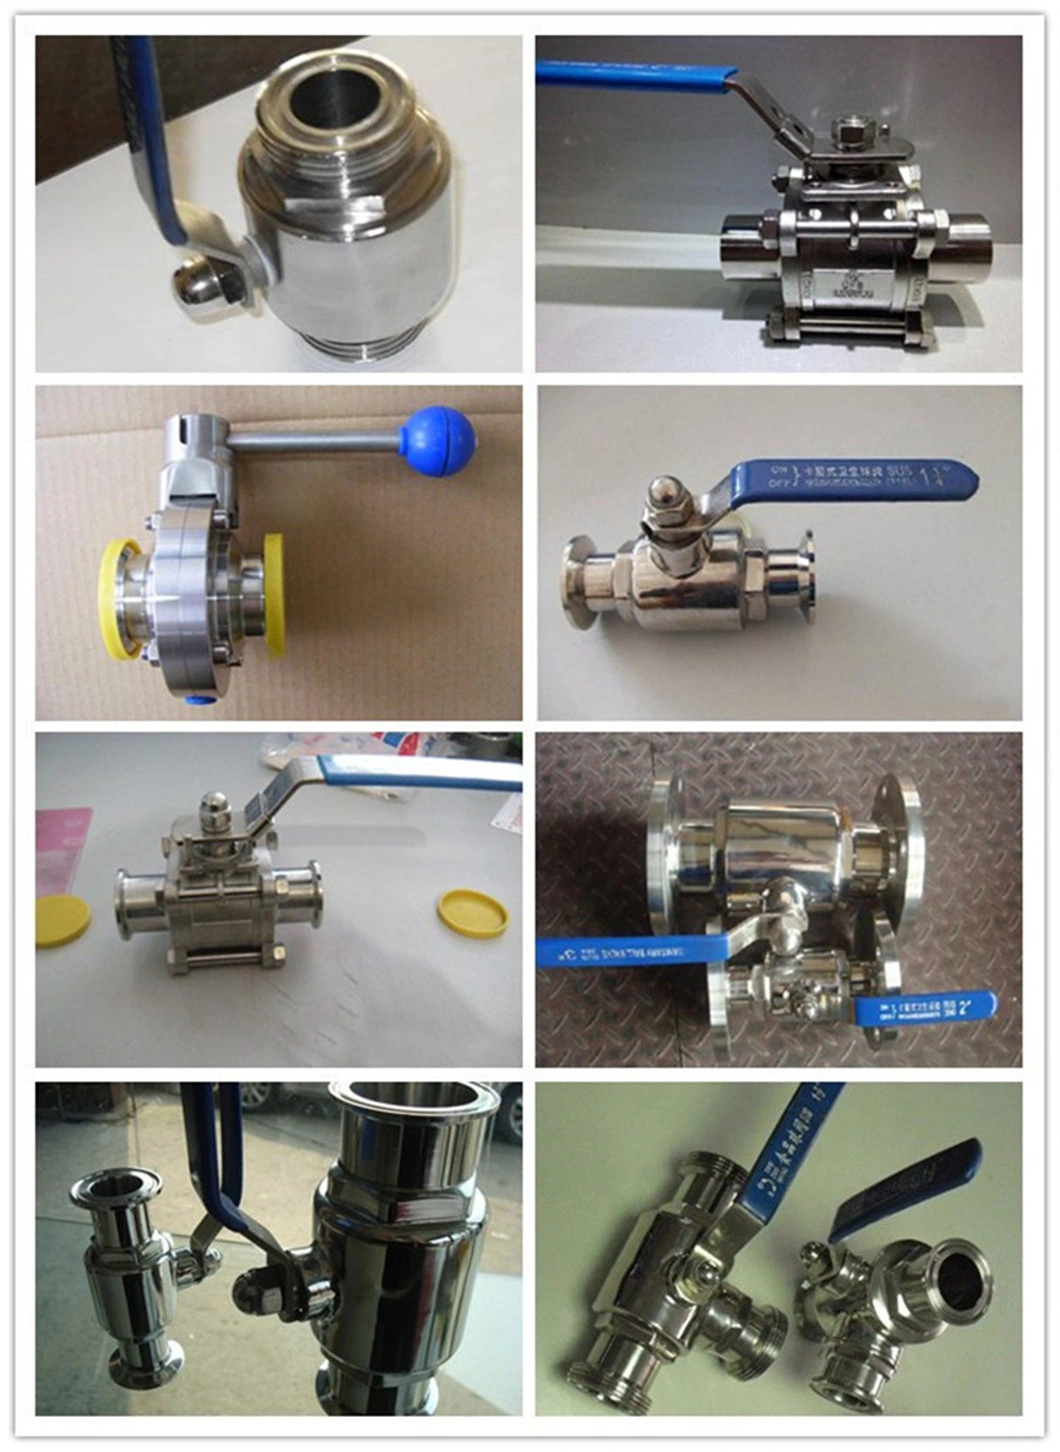 2PC Ball Valve Stainless Steel 304 Class 150/300 (lb) Industrial Hydraulic Control Sanitary 2PC Flanged Ball Valve/Angle Seat Valve/Control Valve/Sampling Valve